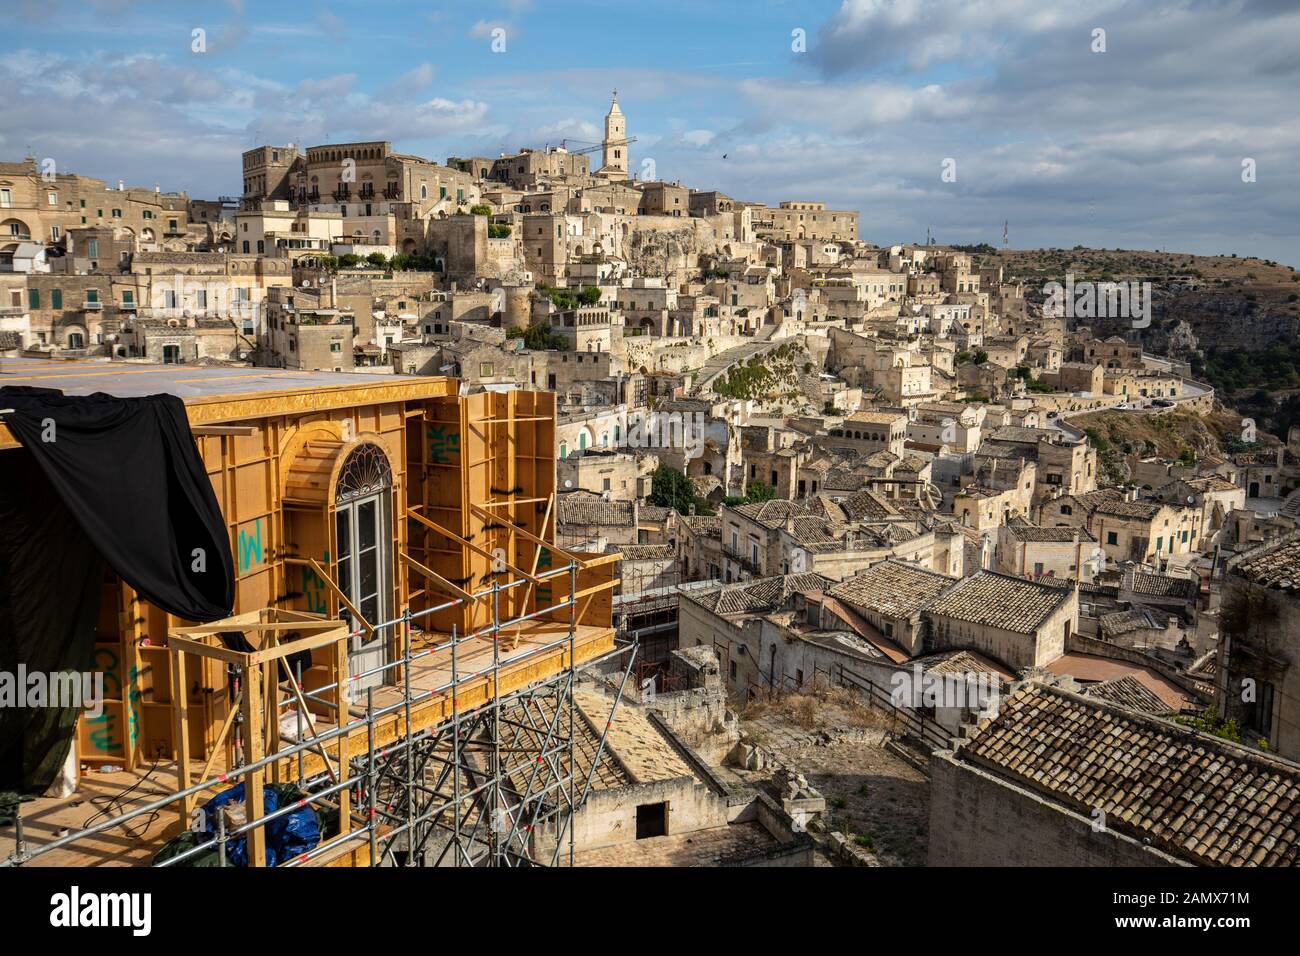 Matera, Italy - Sept 15, 2019: Bond apartment from the movie  "No Time to Die" in Sassi, Matera, Italy. Fictional hotel in the Piazzetta Pascoli area Stock Photo